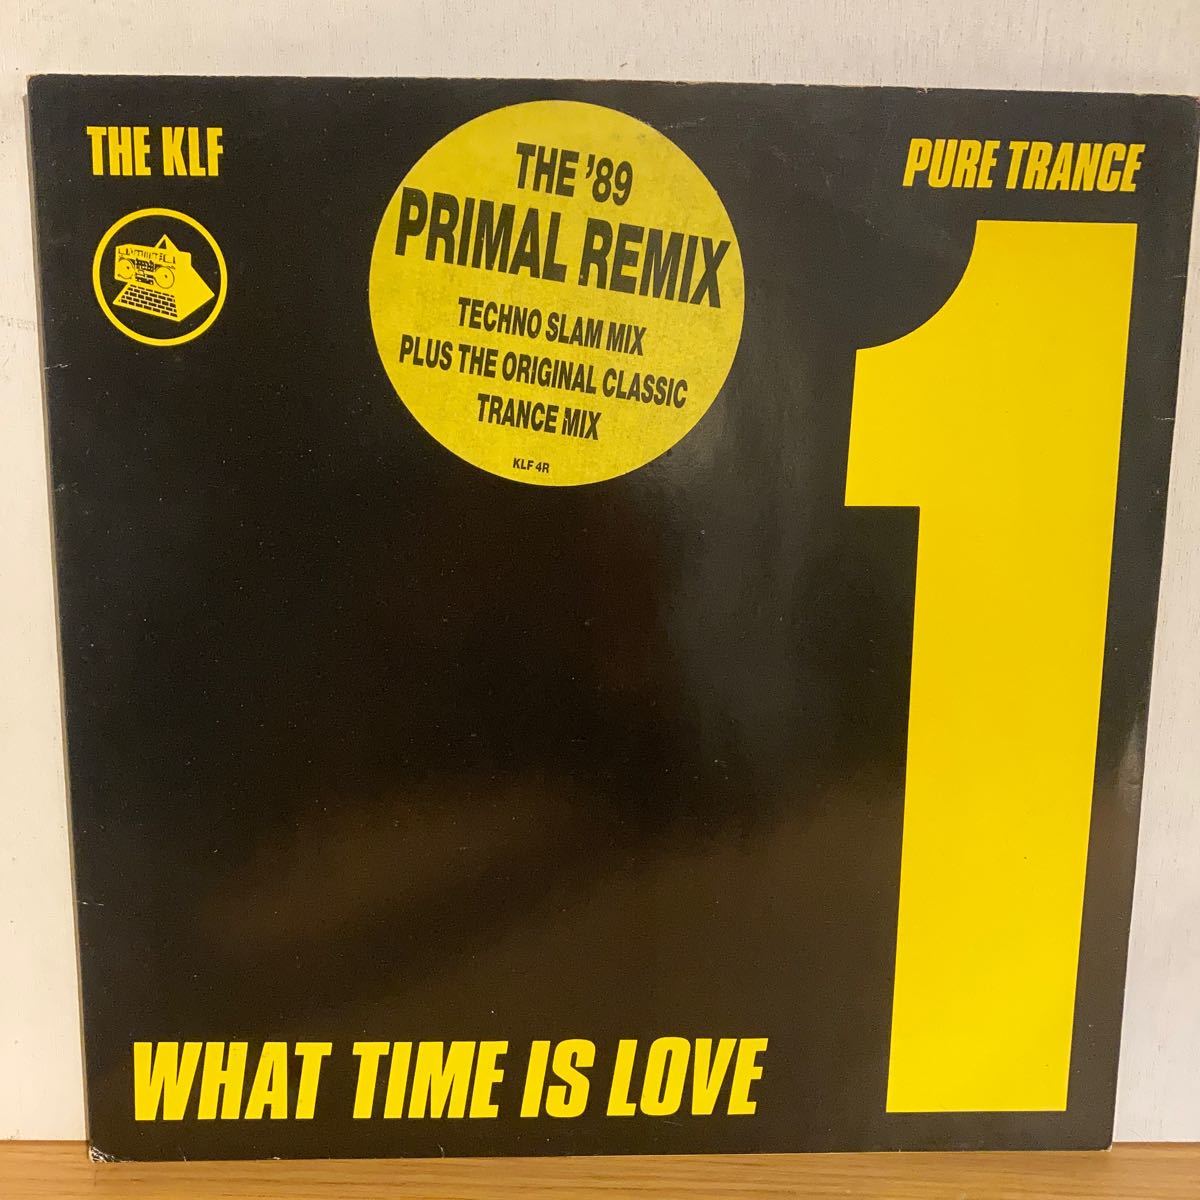 The KLF - What Time Is Love (Pure Trance 1 - The \'89 Primal Remix)